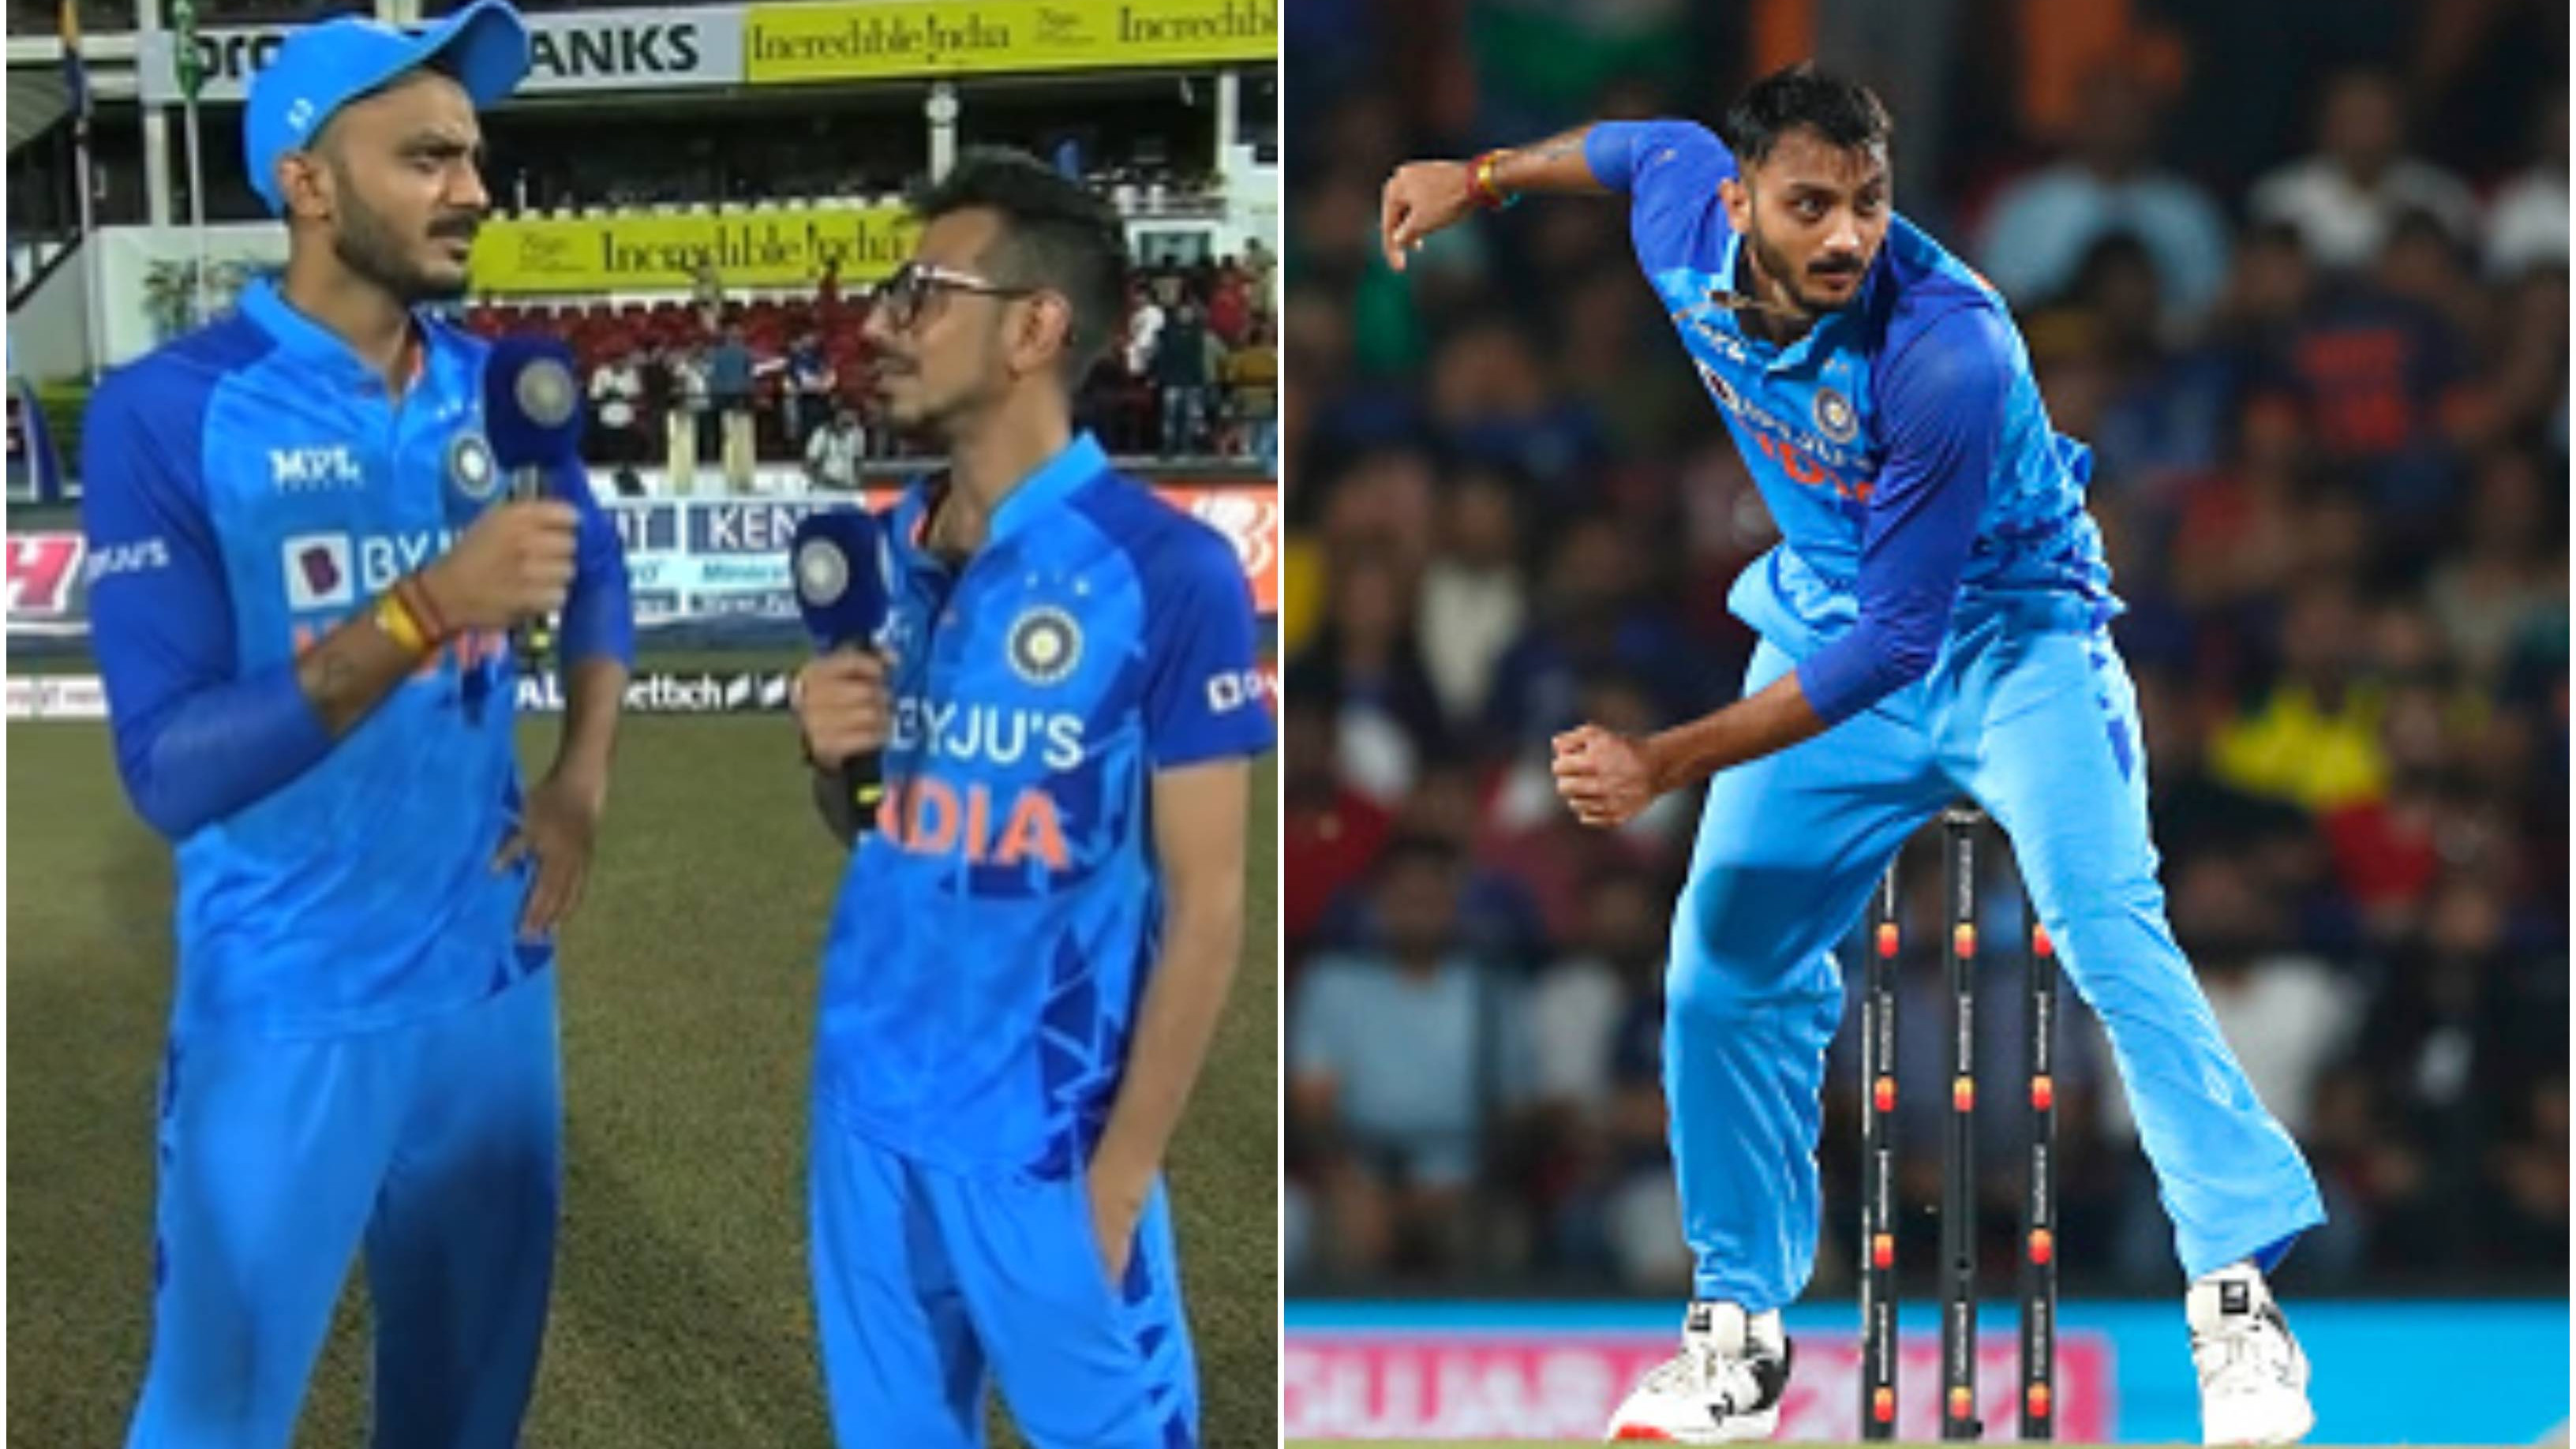 IND v AUS 2022: WATCH – “I try to keep things simple,” says Akshar Patel after his match-winning spell in 2nd T20I